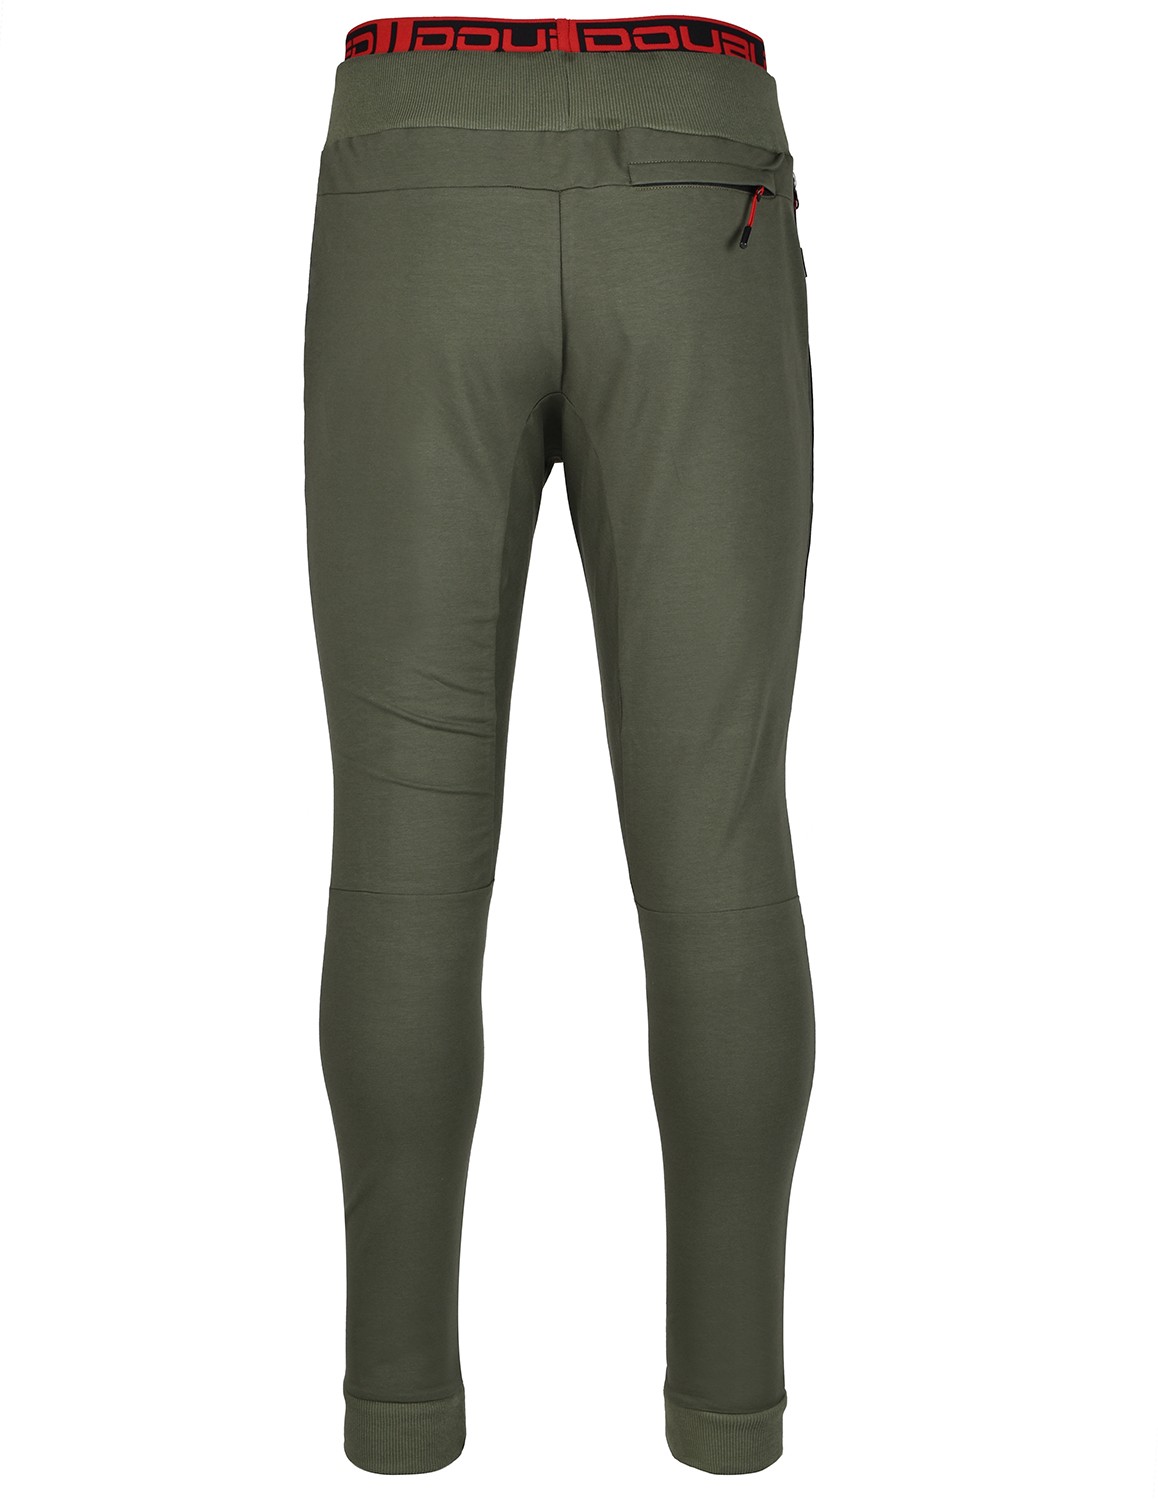 Sweatpants Sport Is Your Gang Army Green